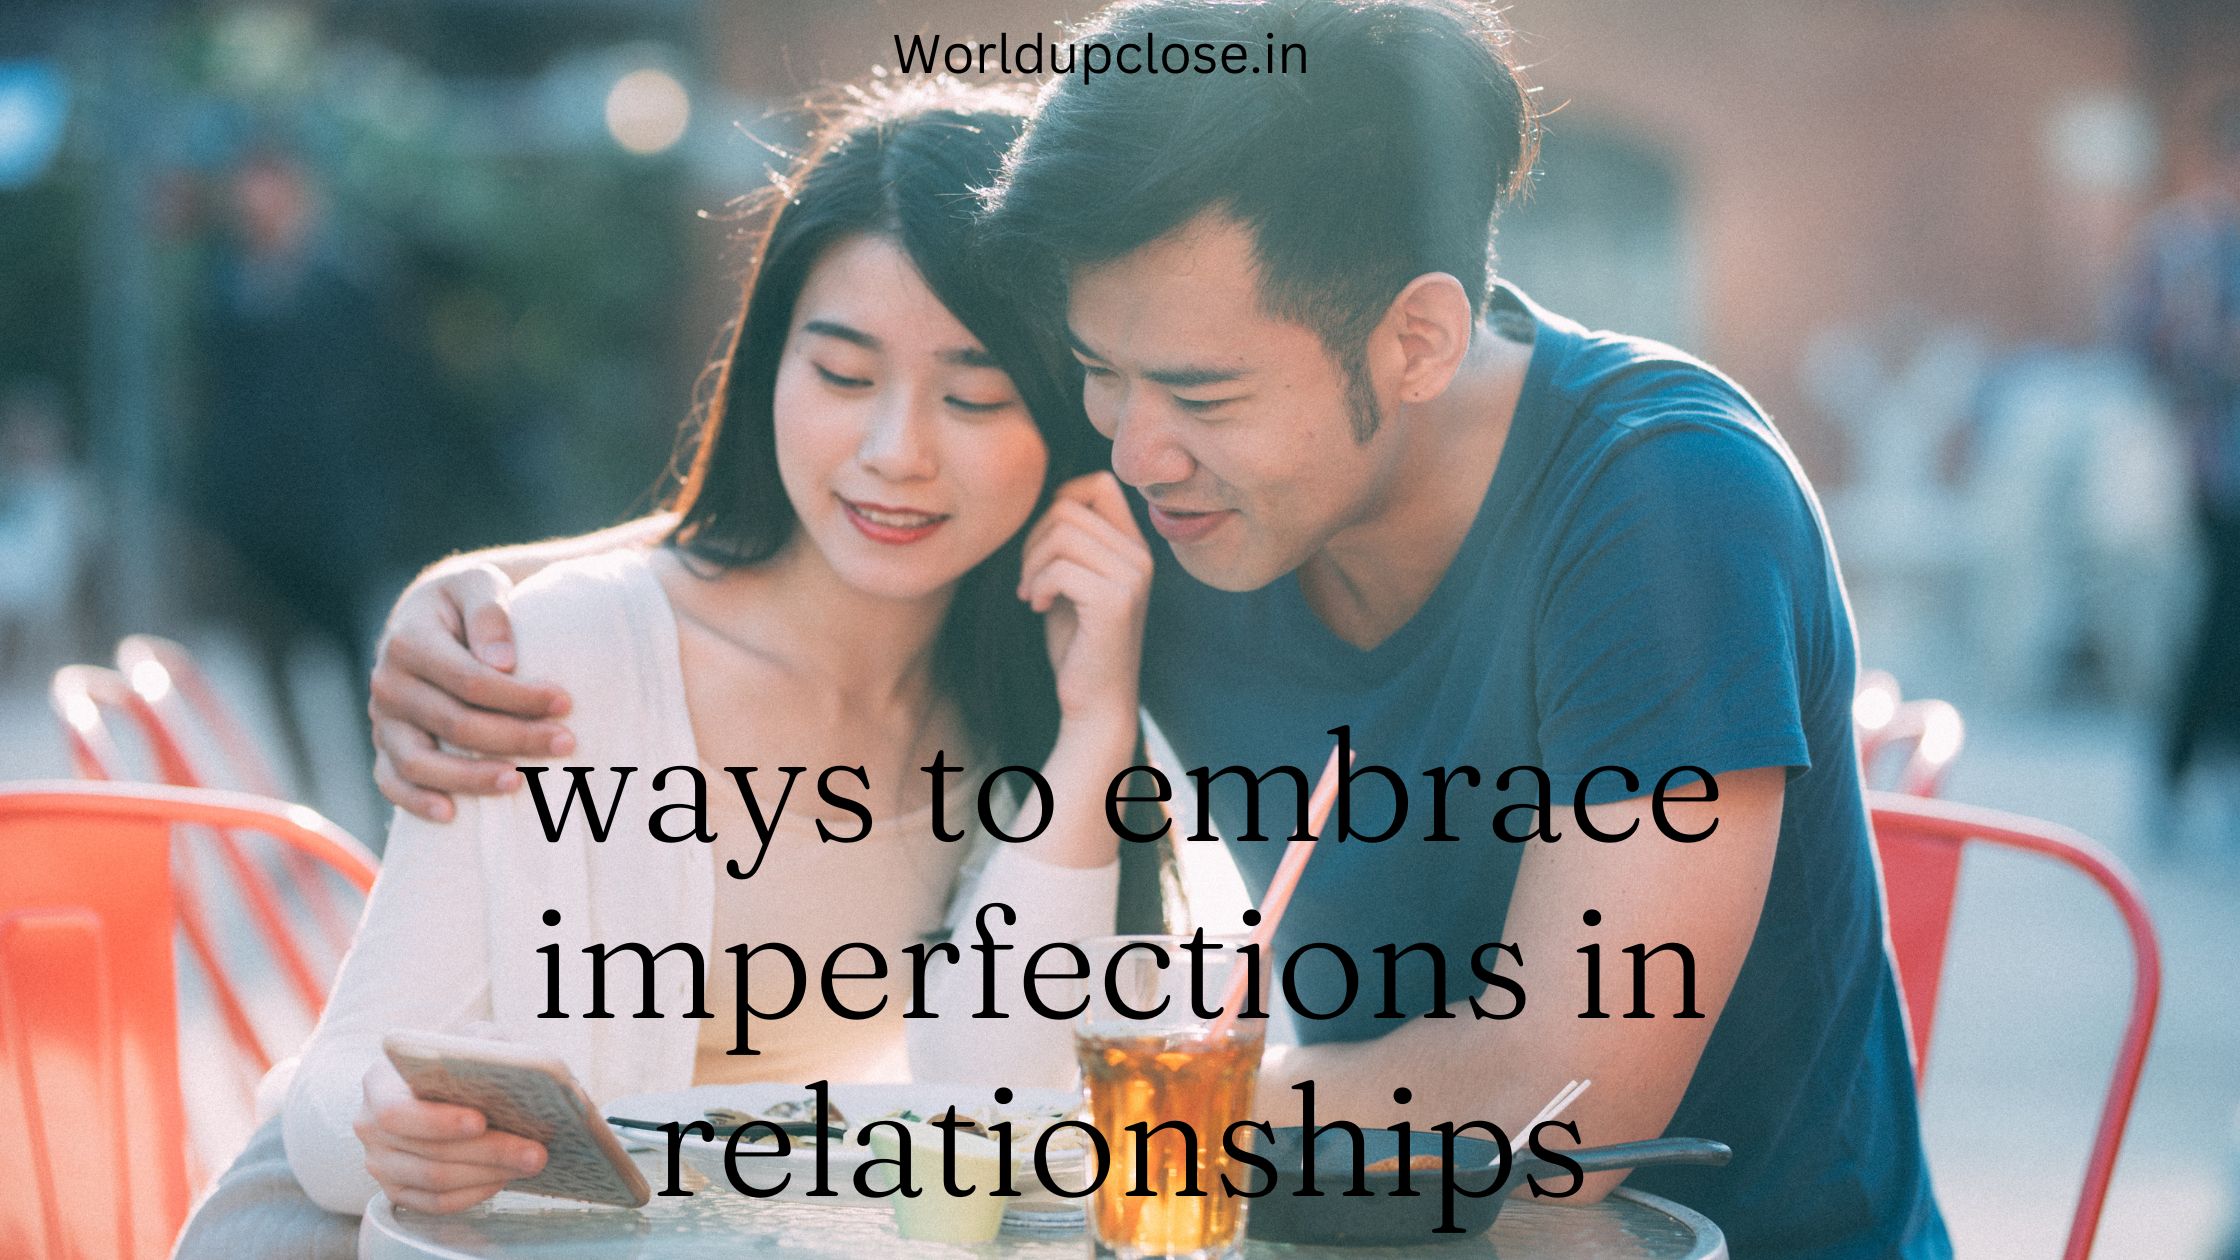 12 Ways to Embrace Imperfections in Relationships 2